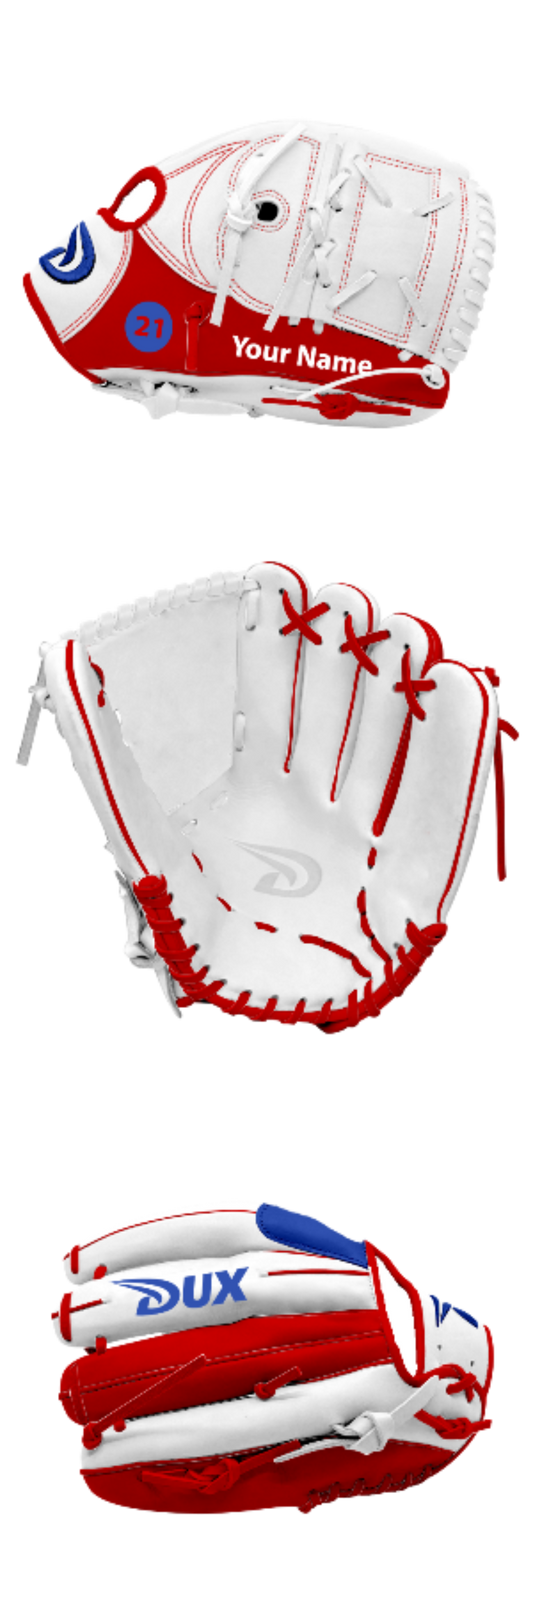 Dux Sports Custom Gloves - English - Customer's Product with price 149.99